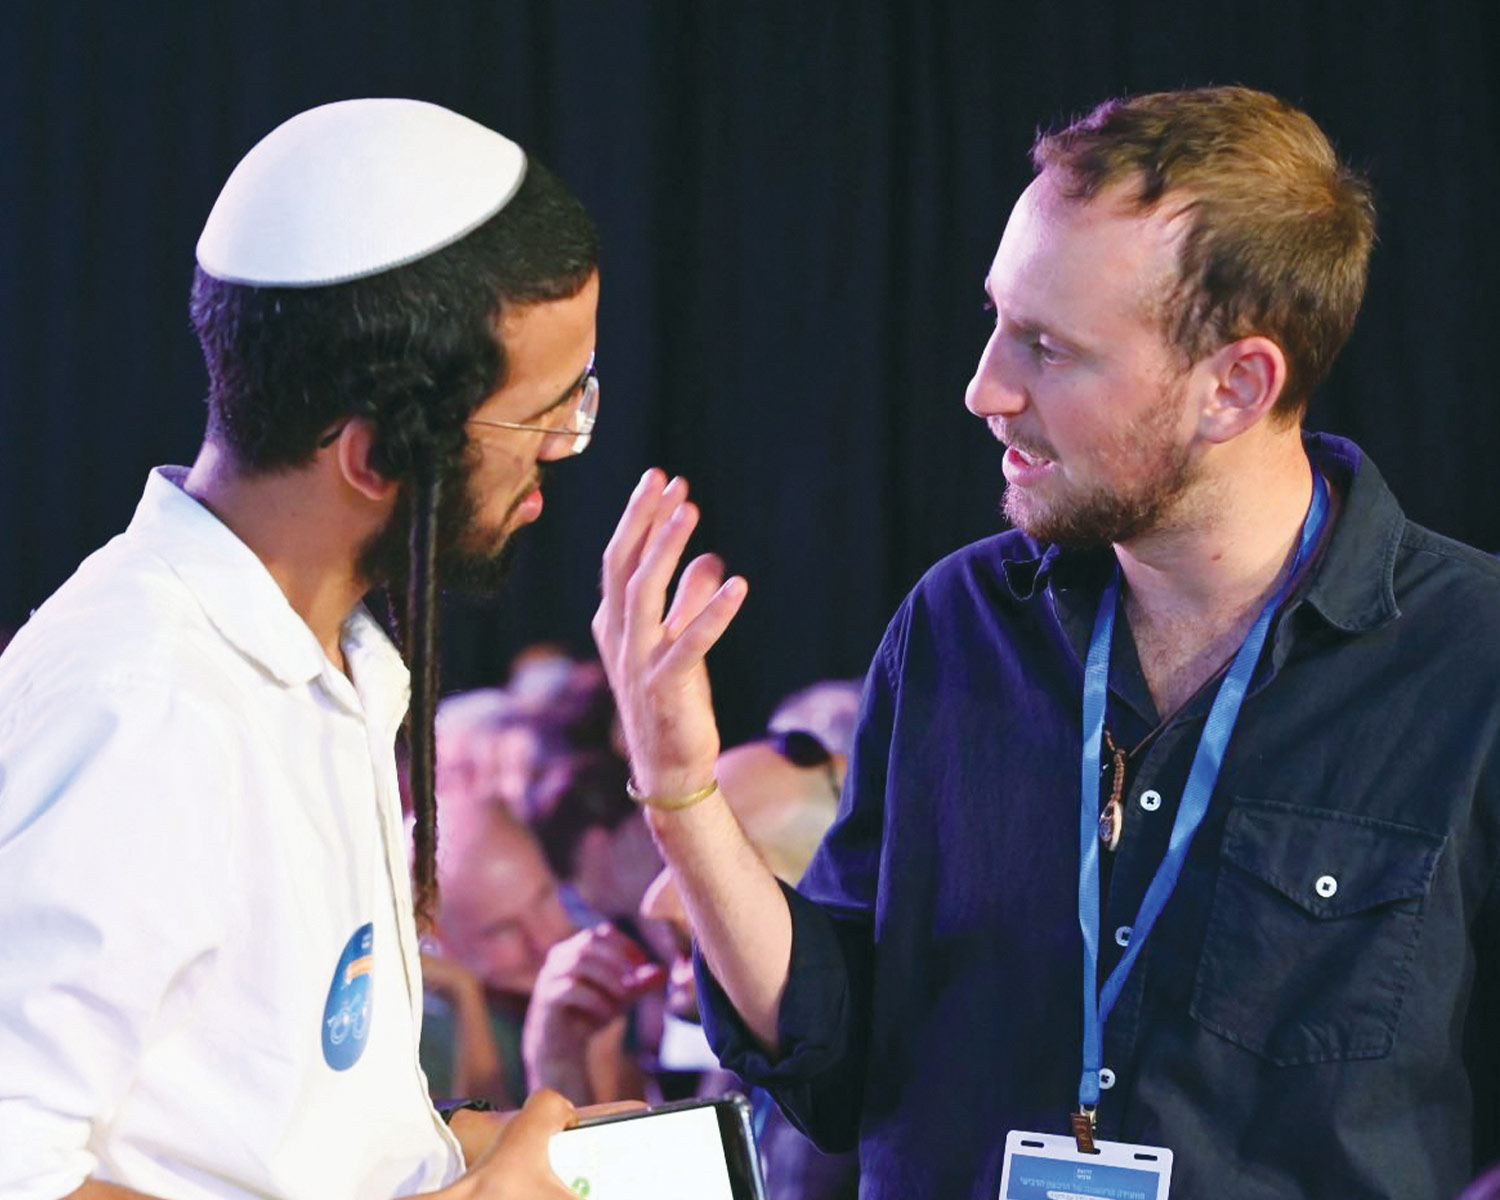 two participants of the Fourth Quarter movement from different backgrounds and locations in Israel engaging in a conversation